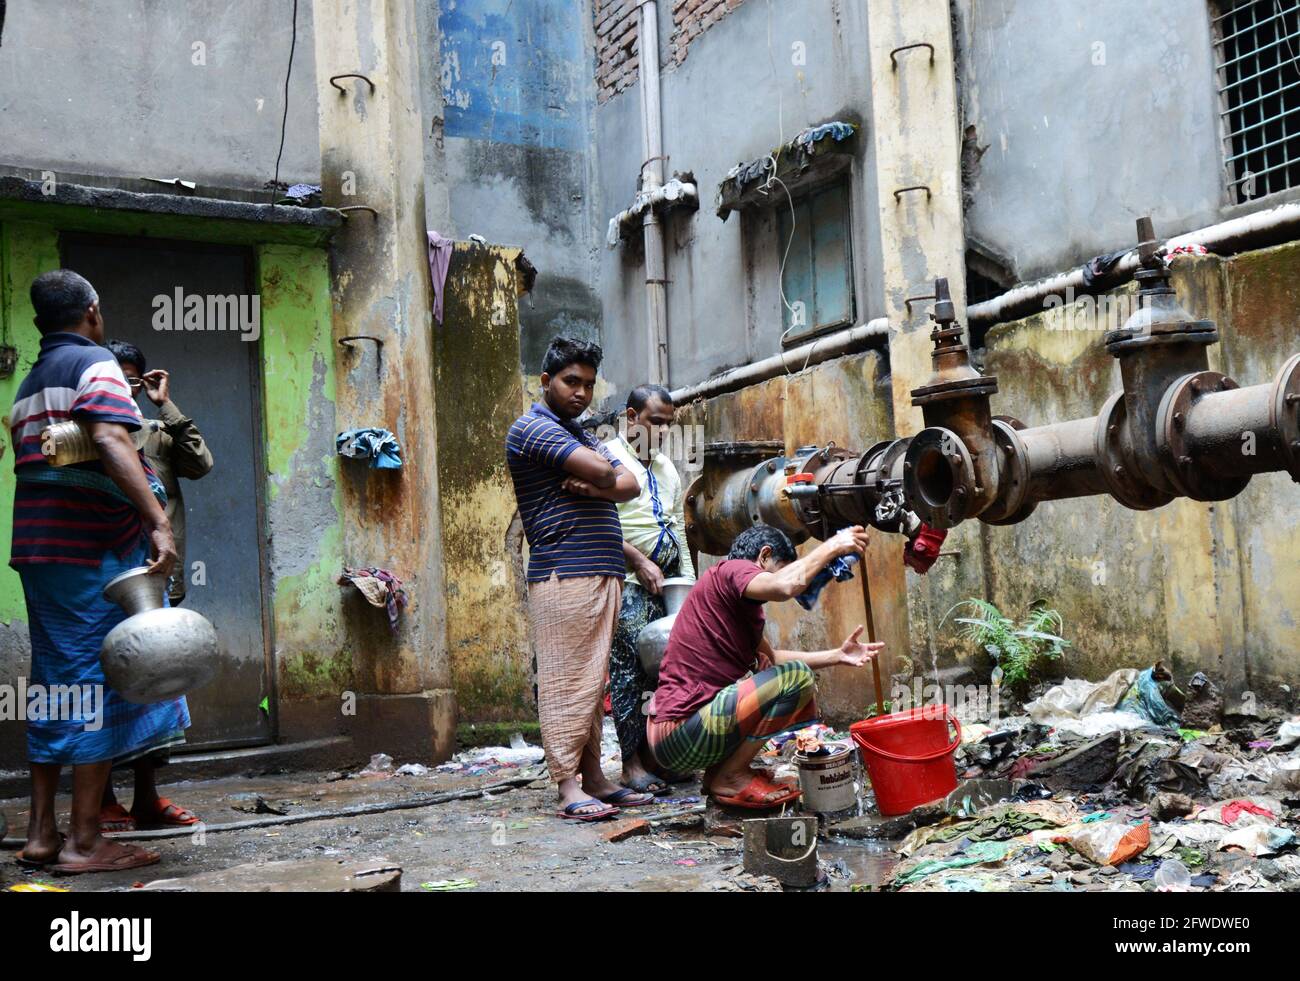 Collecting water from a leaking pipe in Dhaka, Bangladesh. Stock Photo